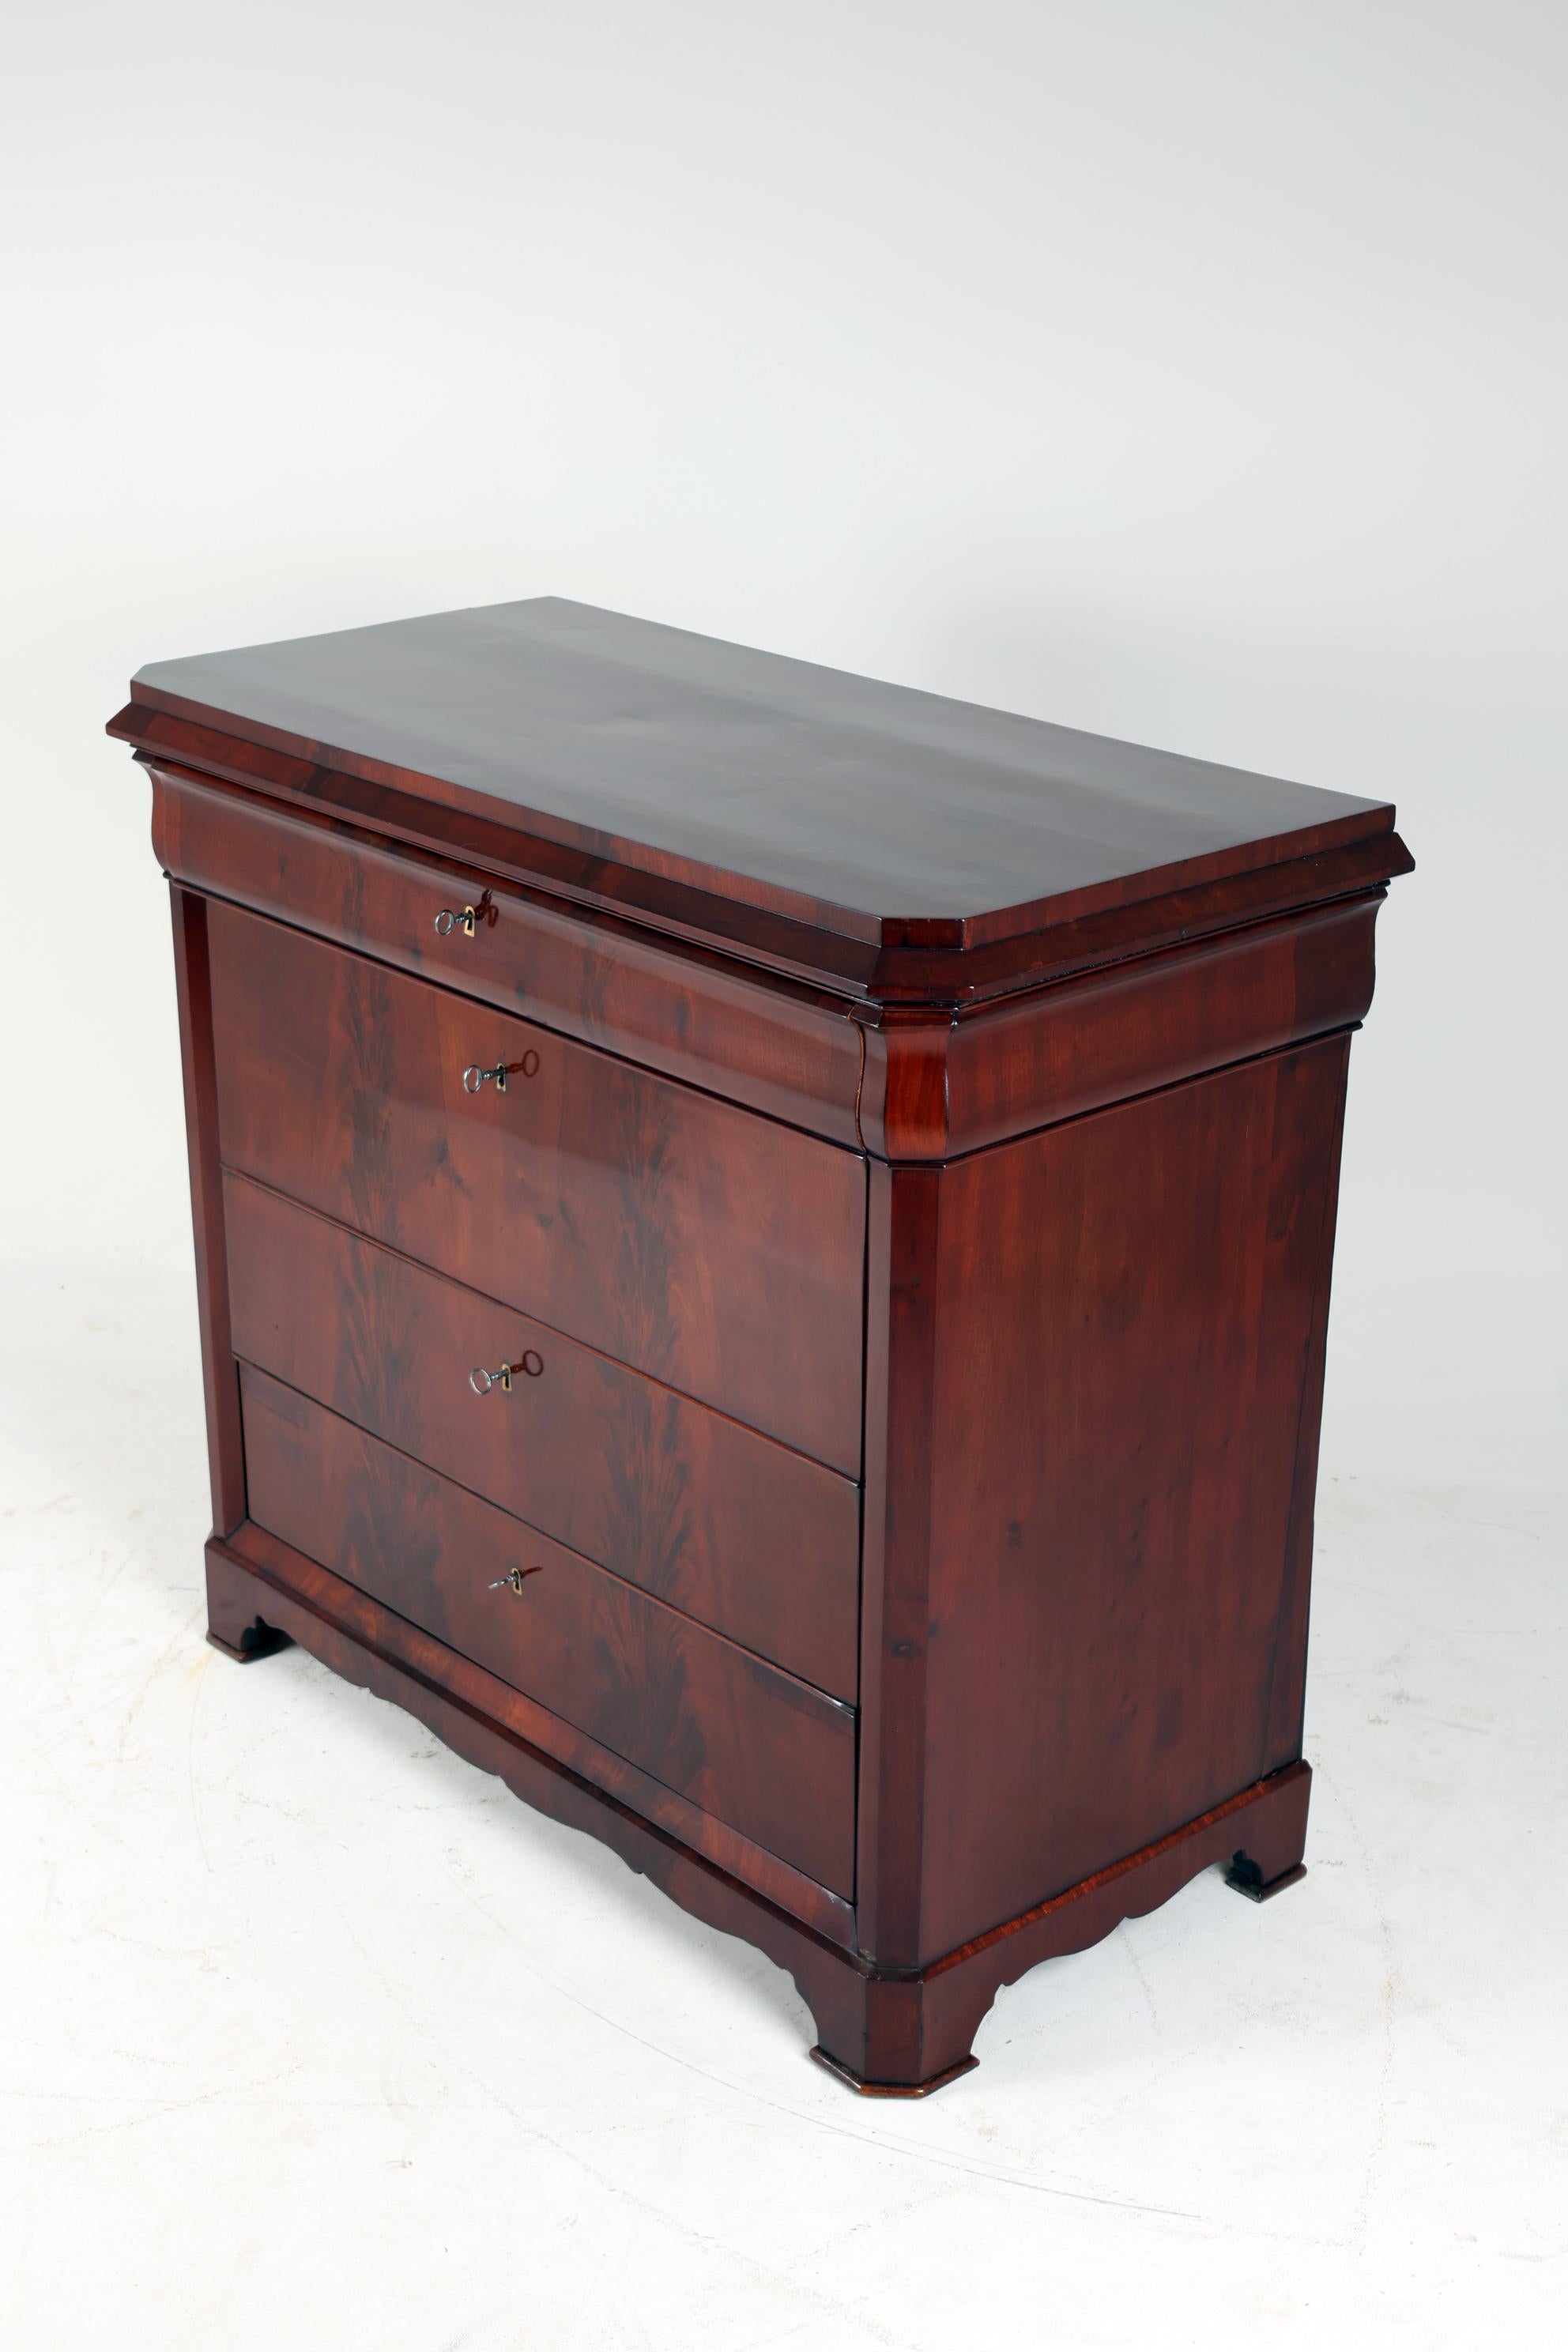 XIX Century Biedermeier Chest of Drawers,
Germany, 1830-1835
Mahogany

Biedermeier Chest of Drawers with spectacular mahogany veneer which is laid absolutely symmetrically and runs across the entire front of the furniture.
Four drawers with discreet